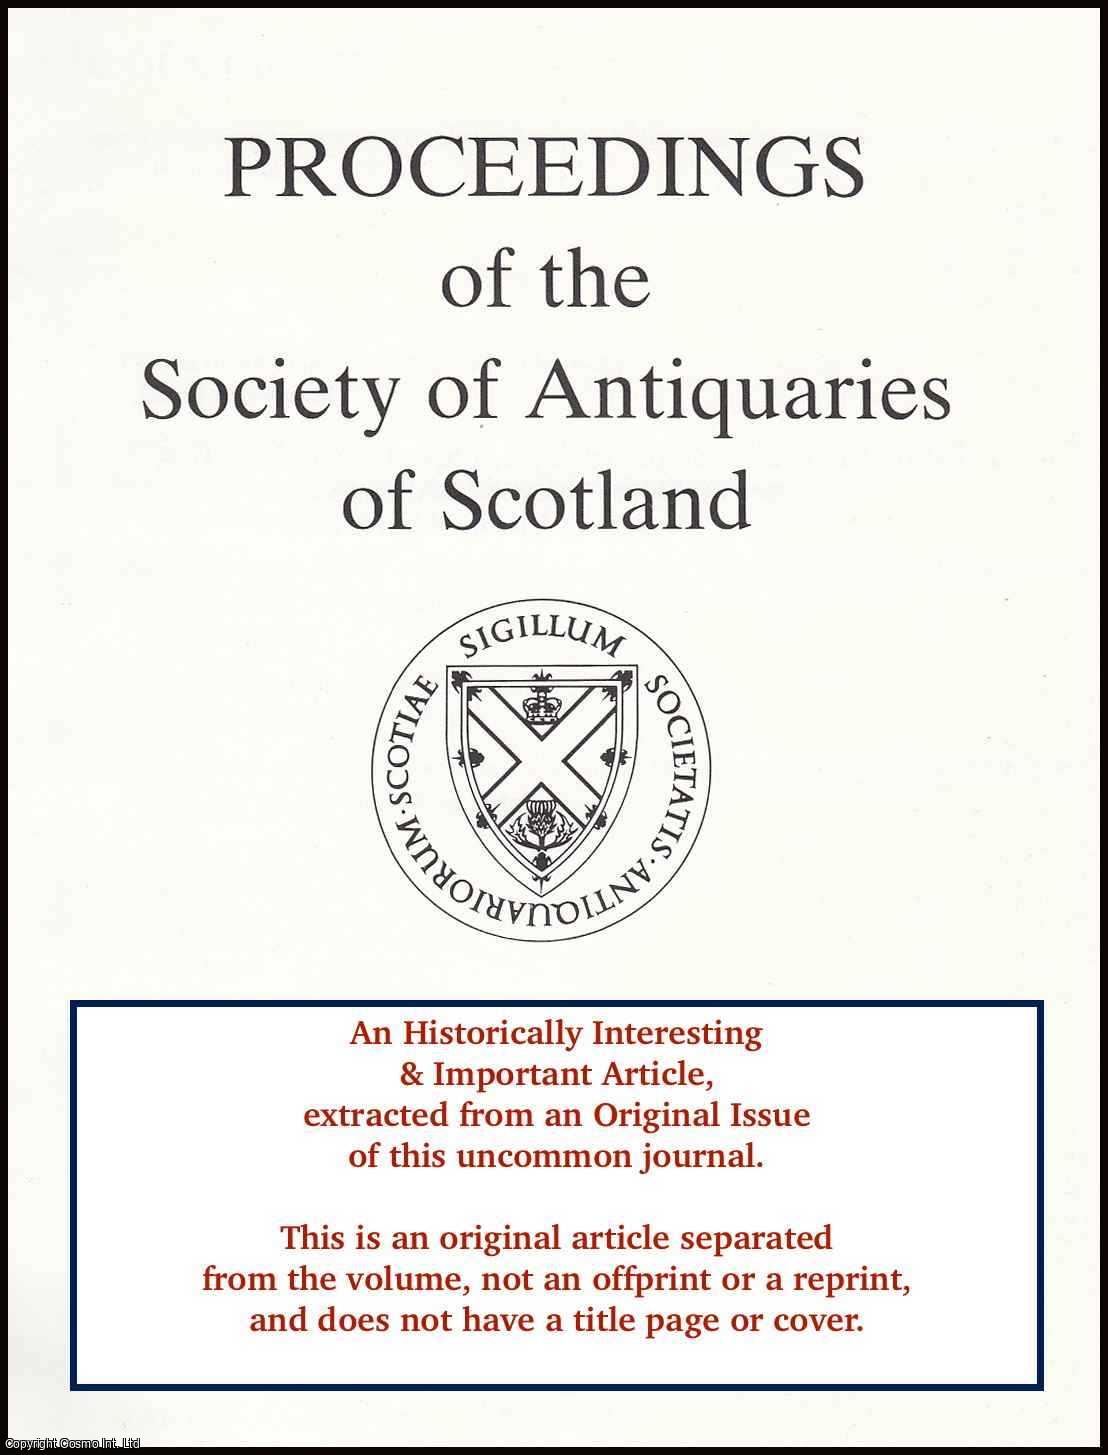 John A. Atkinson - The Coopers Lane Project: Craft and Cooperage in Post-Medieval Campbeltown. An original article from the Proceedings of the Society of Antiquaries of Scotland, 1994.